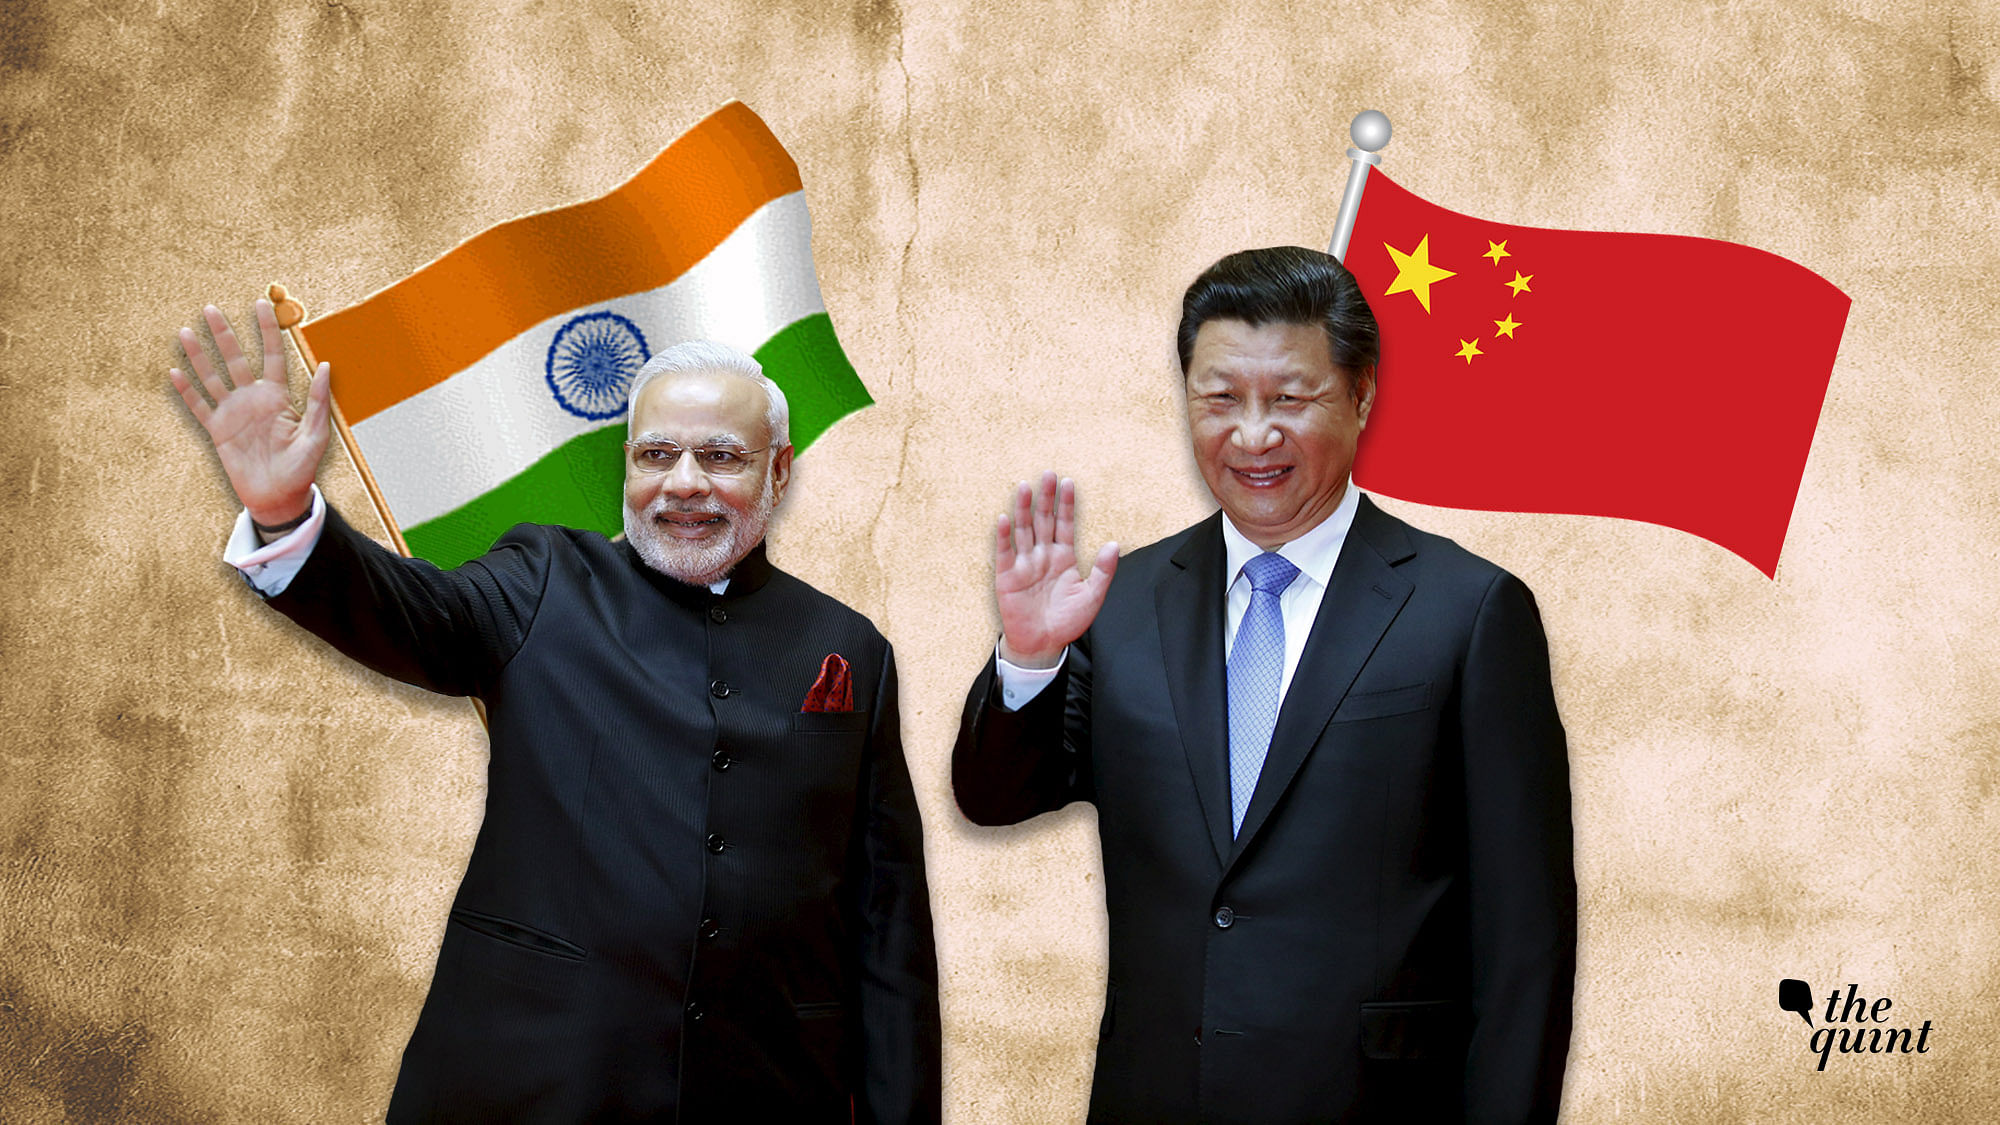 Archival image of PM Modi and President Xi Jinping, used for representational purposes.